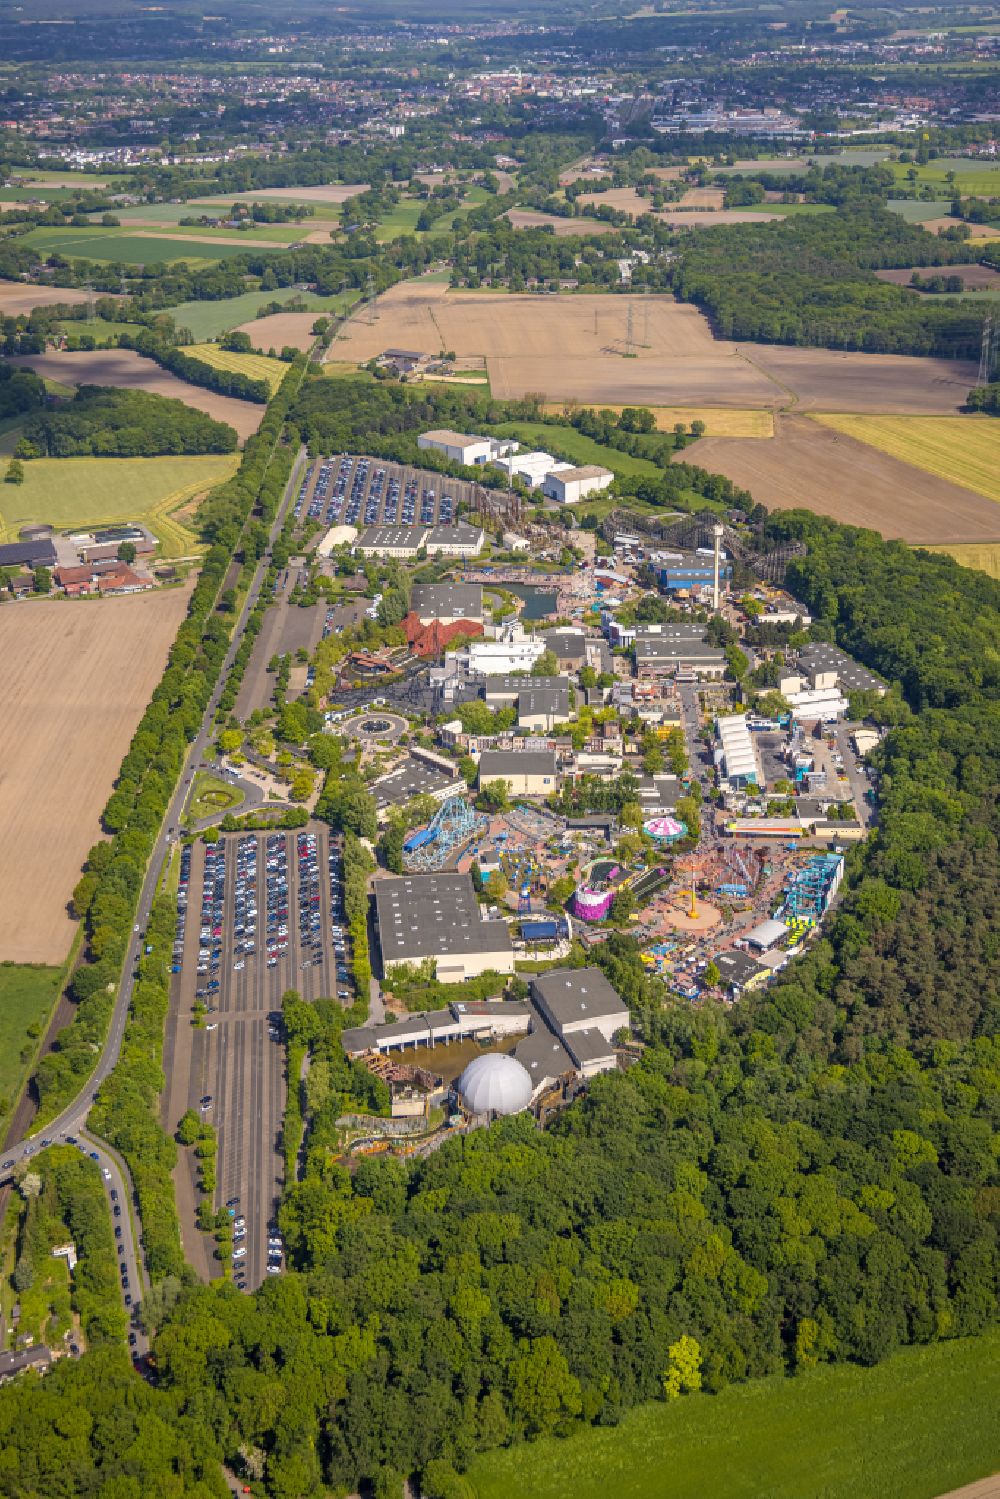 Aerial image Feldhausen - Fun Park Movie Park Germany in Feldhausen in the state of North Rhine-Westphalia. The movie and film themed fun park is closed for the winter